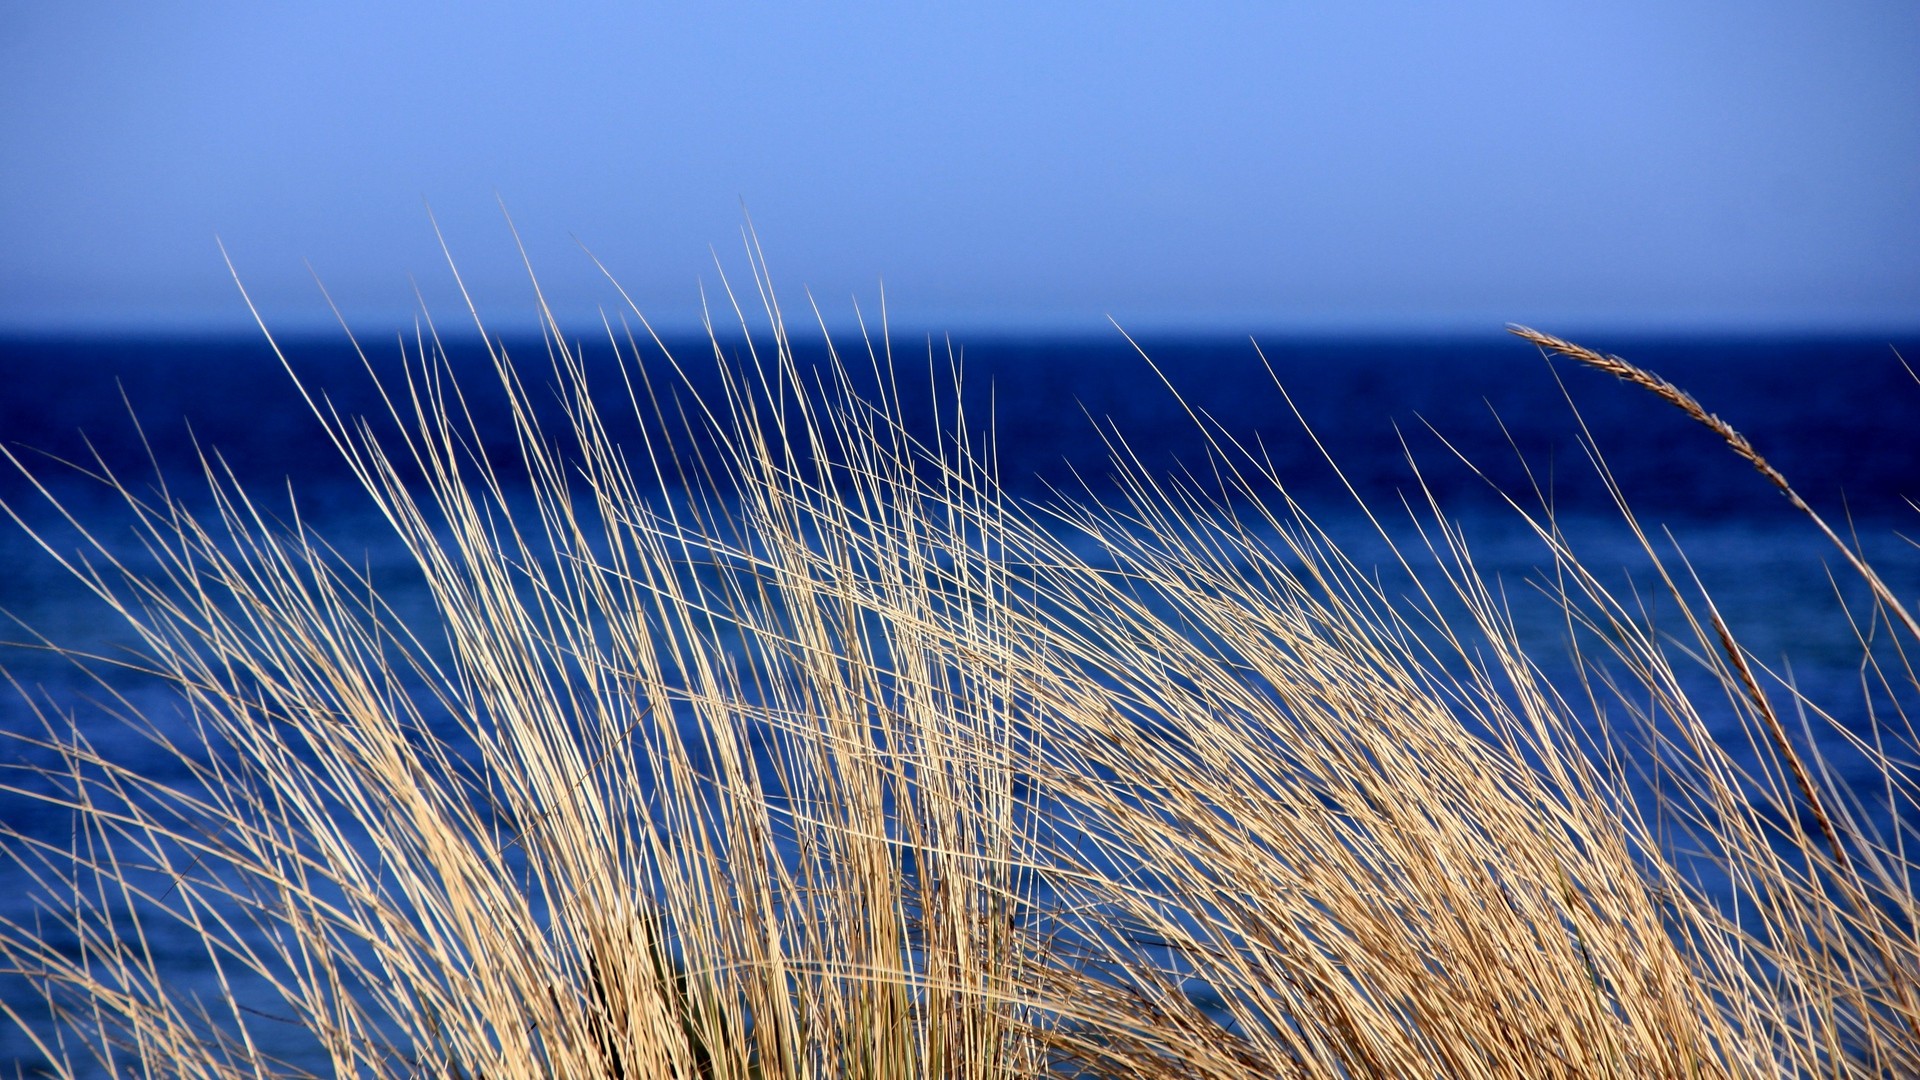 1920x1080 wallpapers: grass, sea, wind, sky (image)